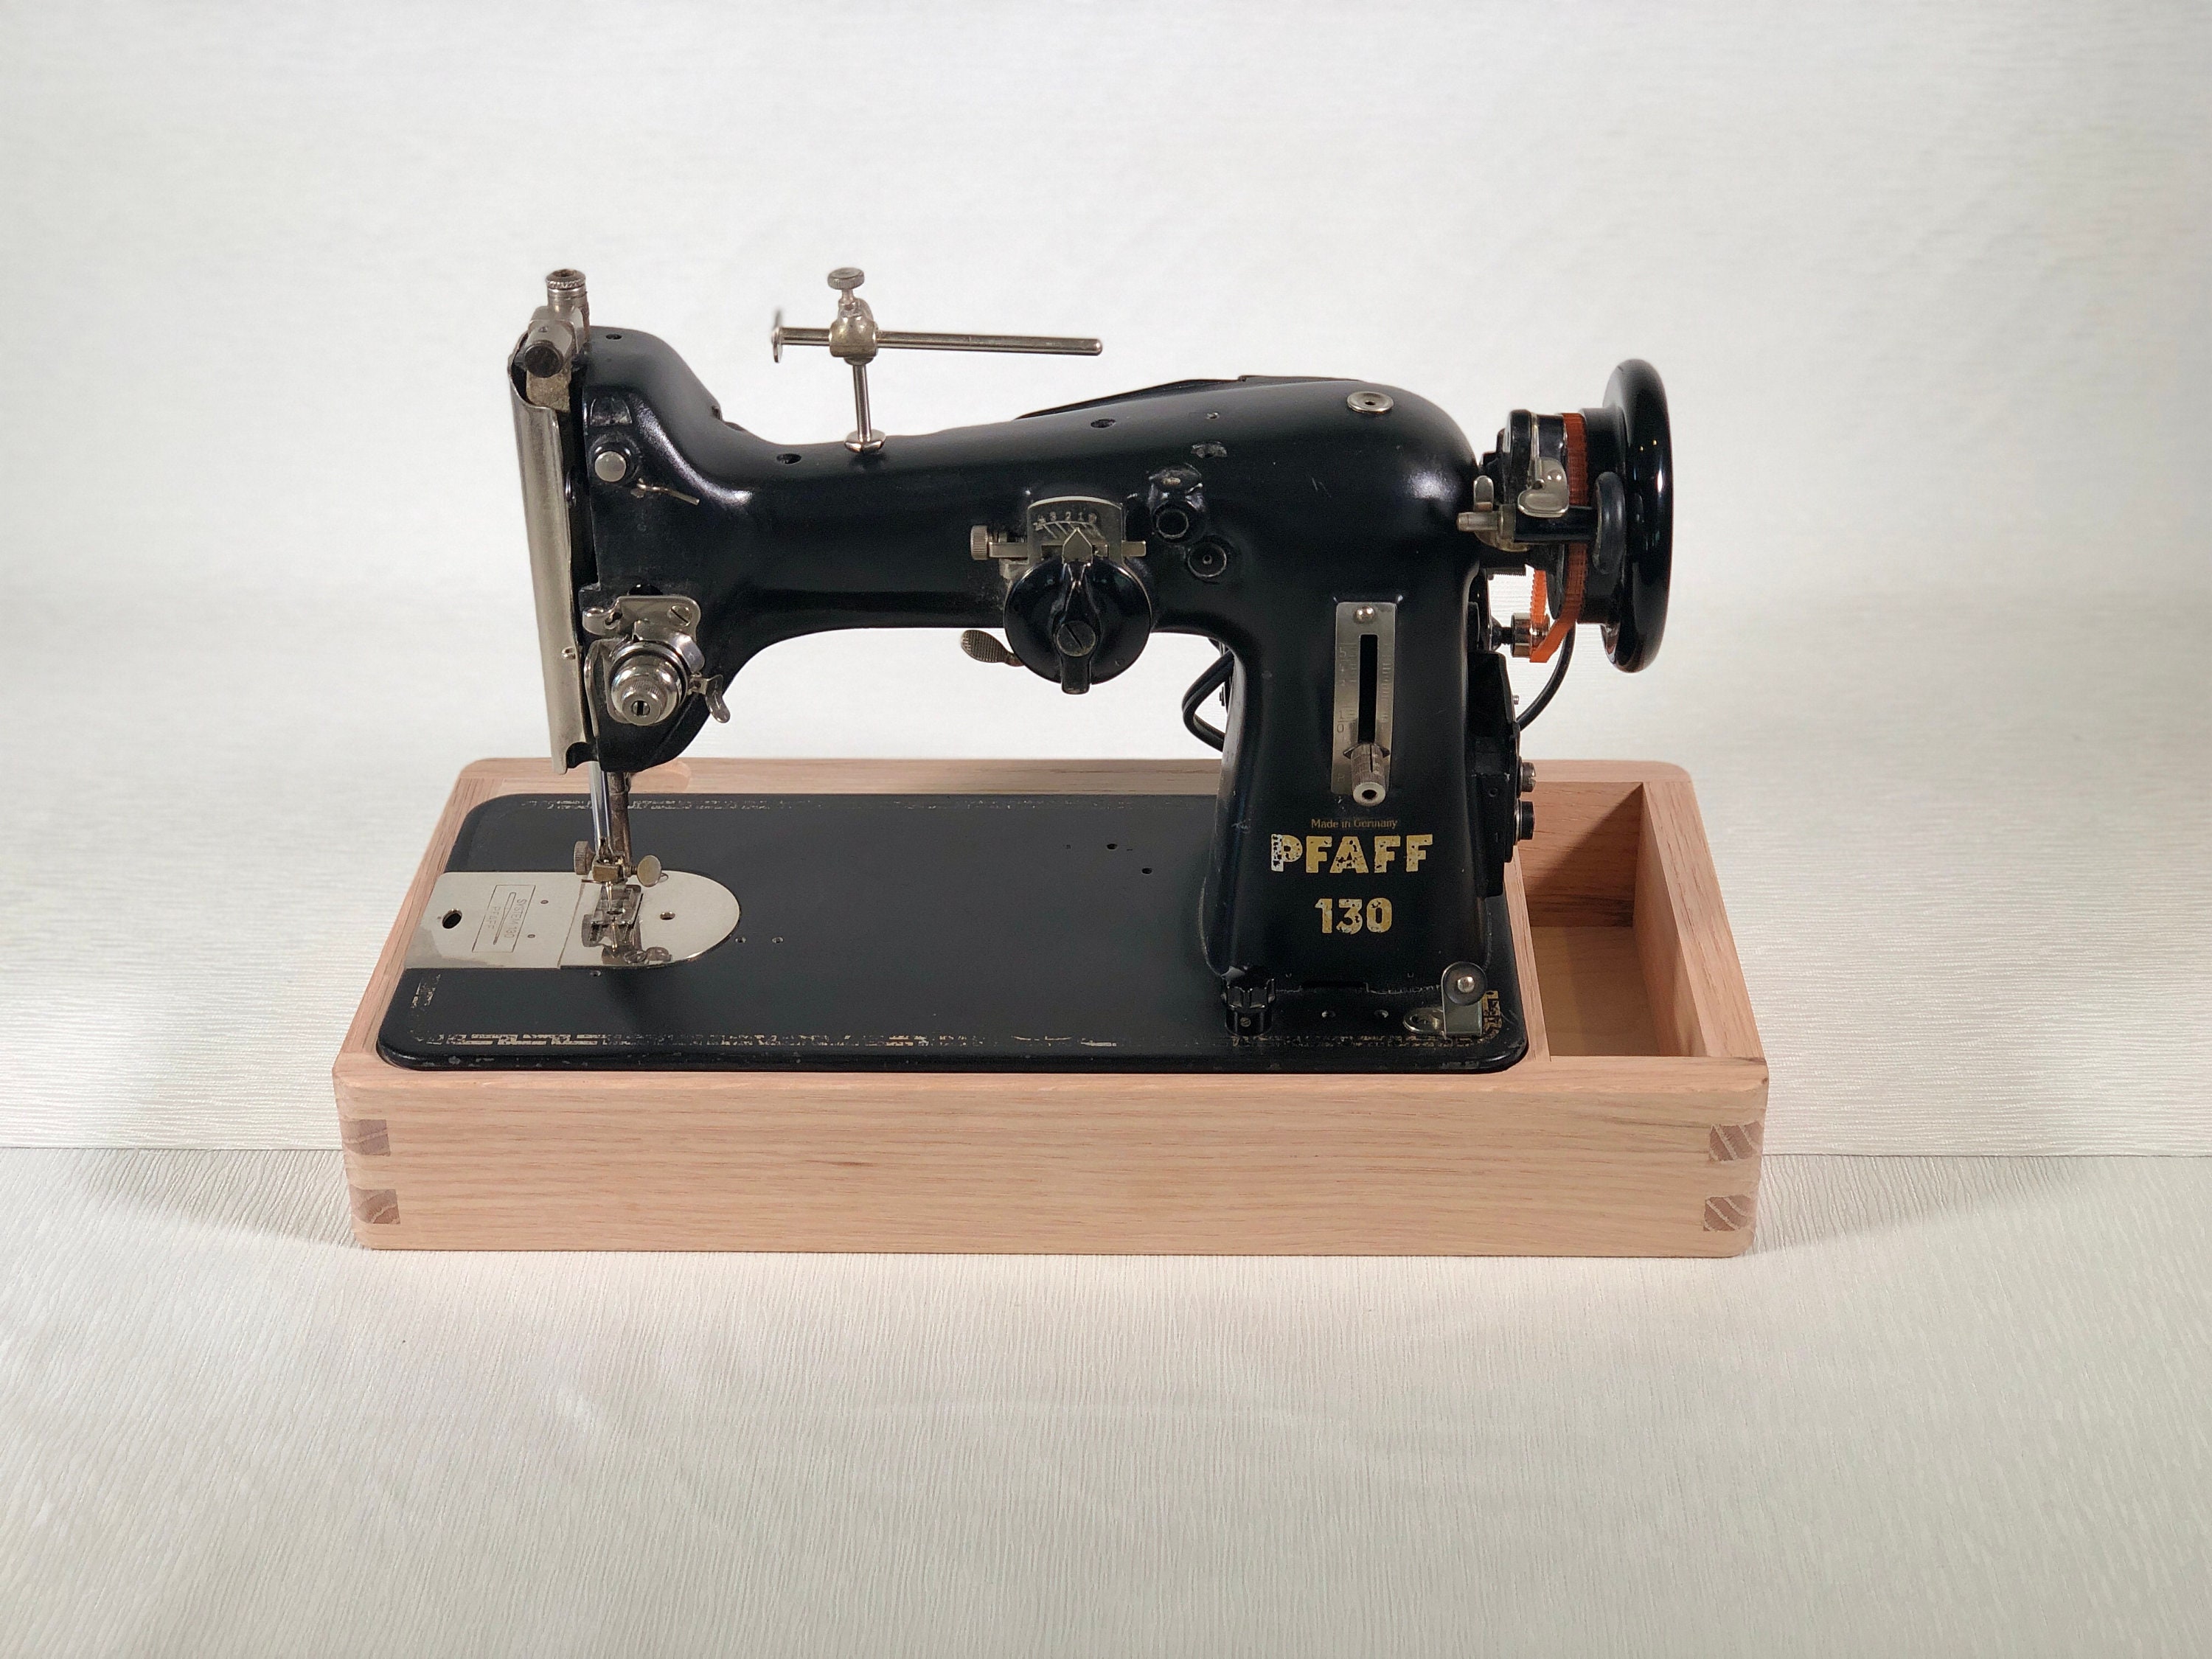 Sewing Machine for Beginners, The Dream by American Ghana